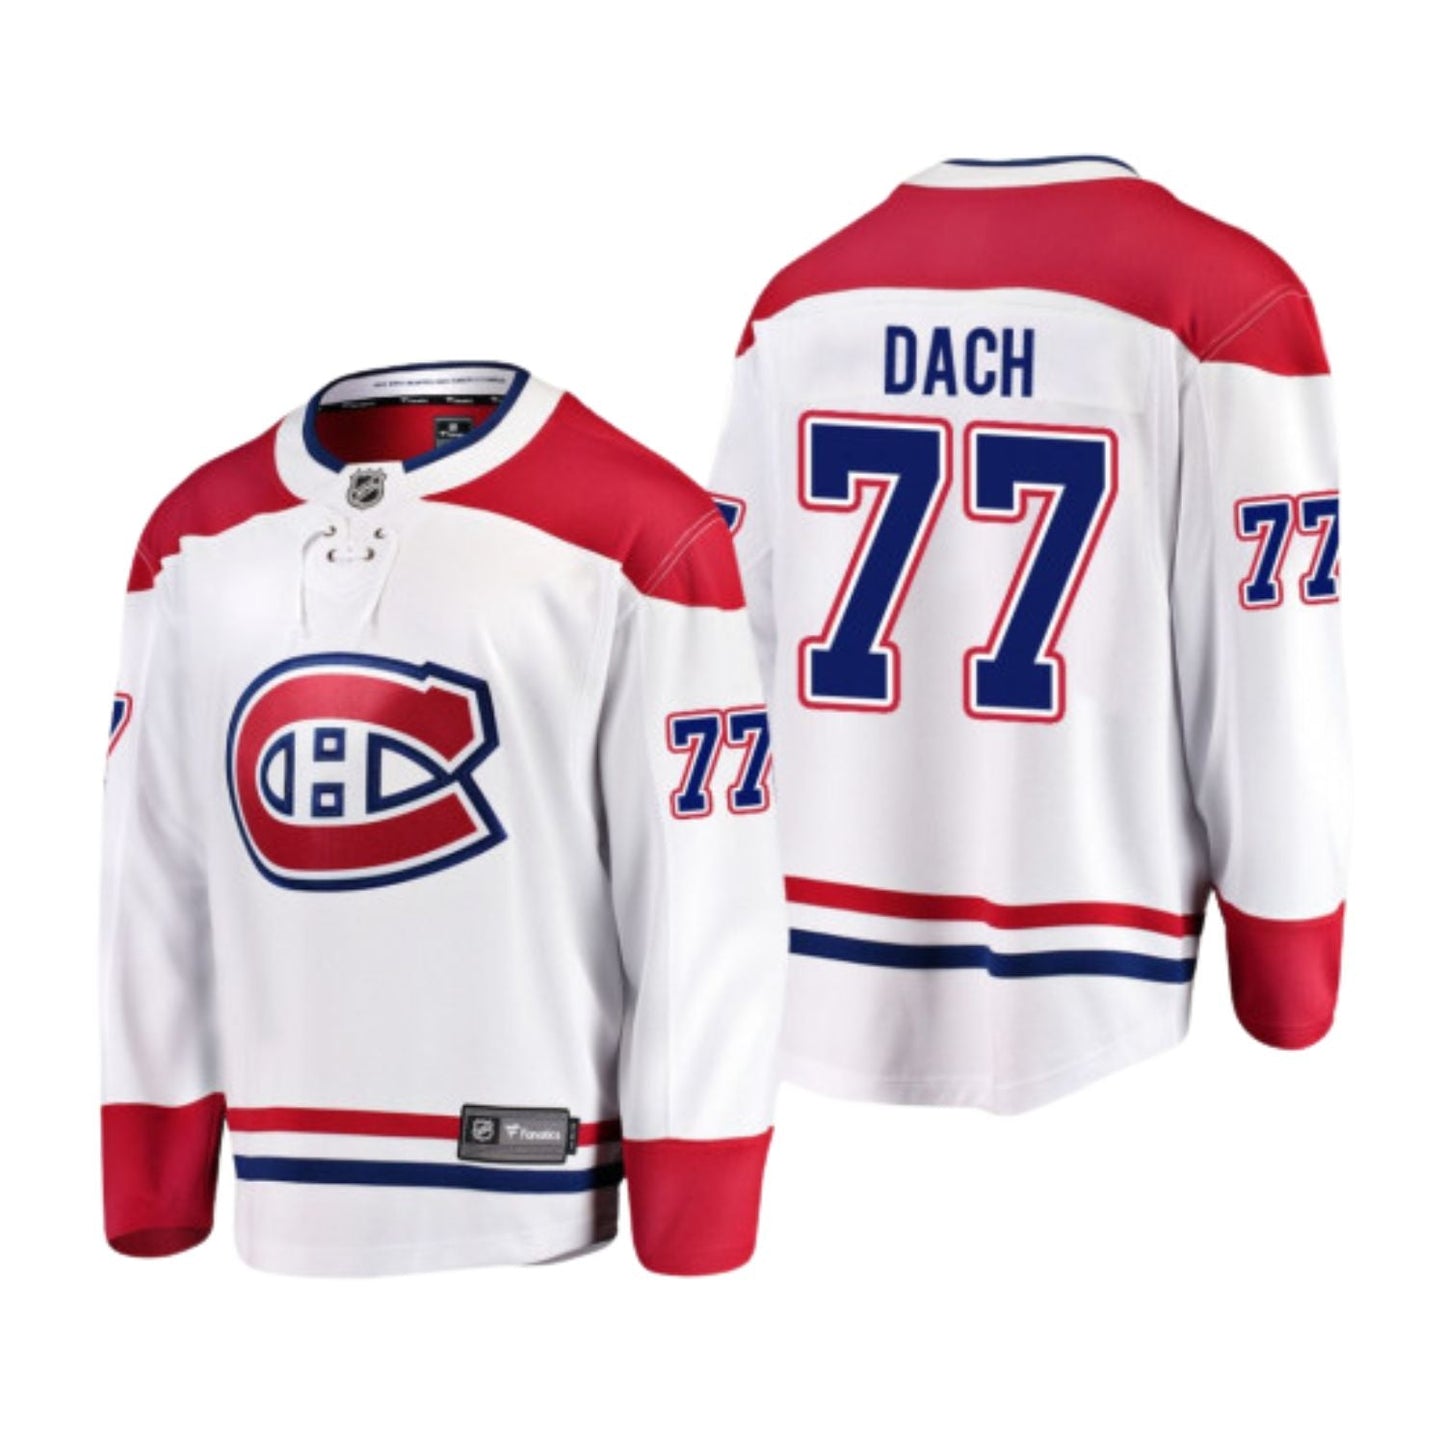 NHL Kirby Dach Montreal Canadiens 77 Jersey